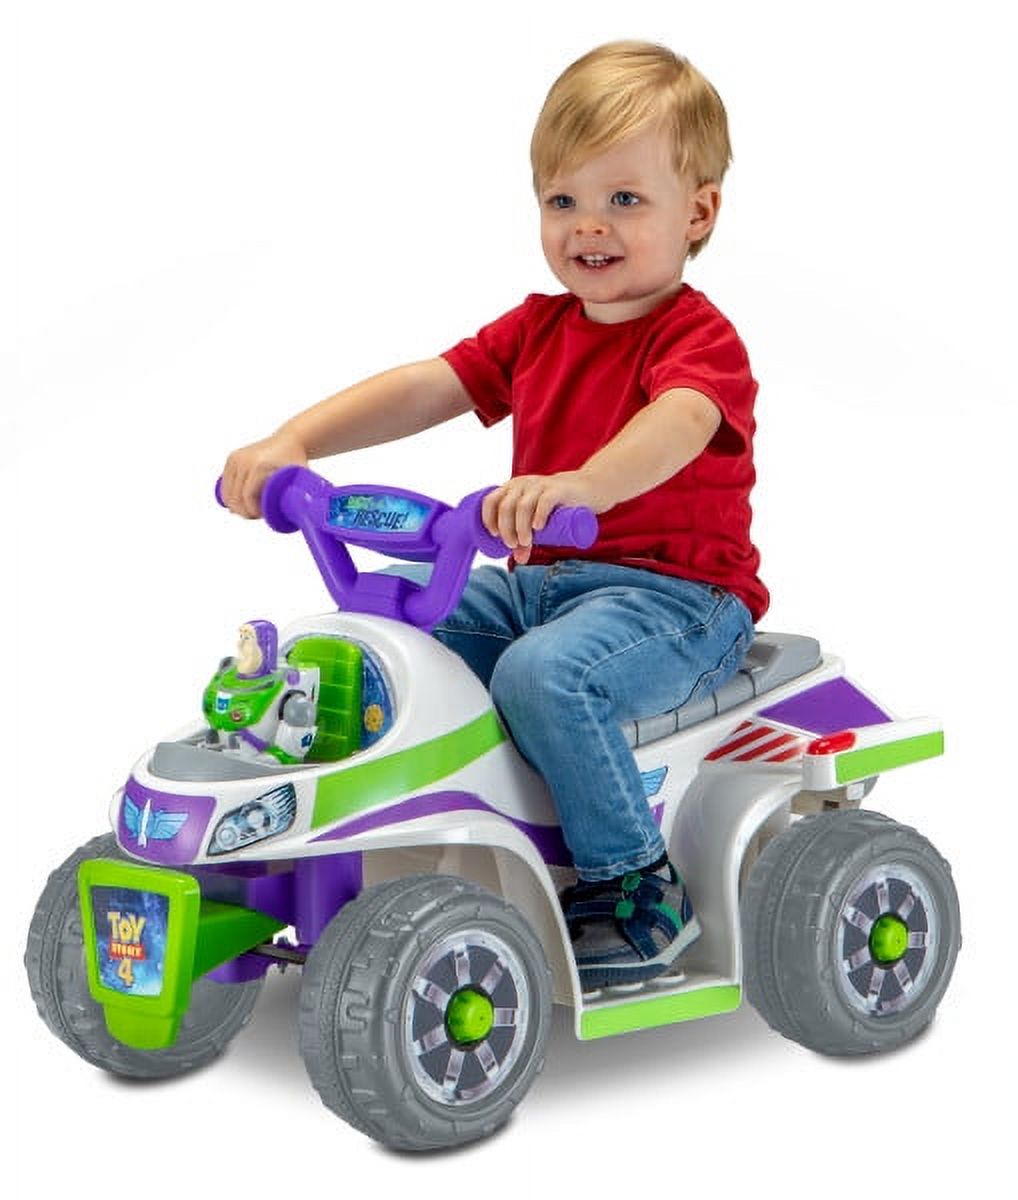 Pacific Cycle 6v Toy Story Buzz Lightyear Quad - image 1 of 7